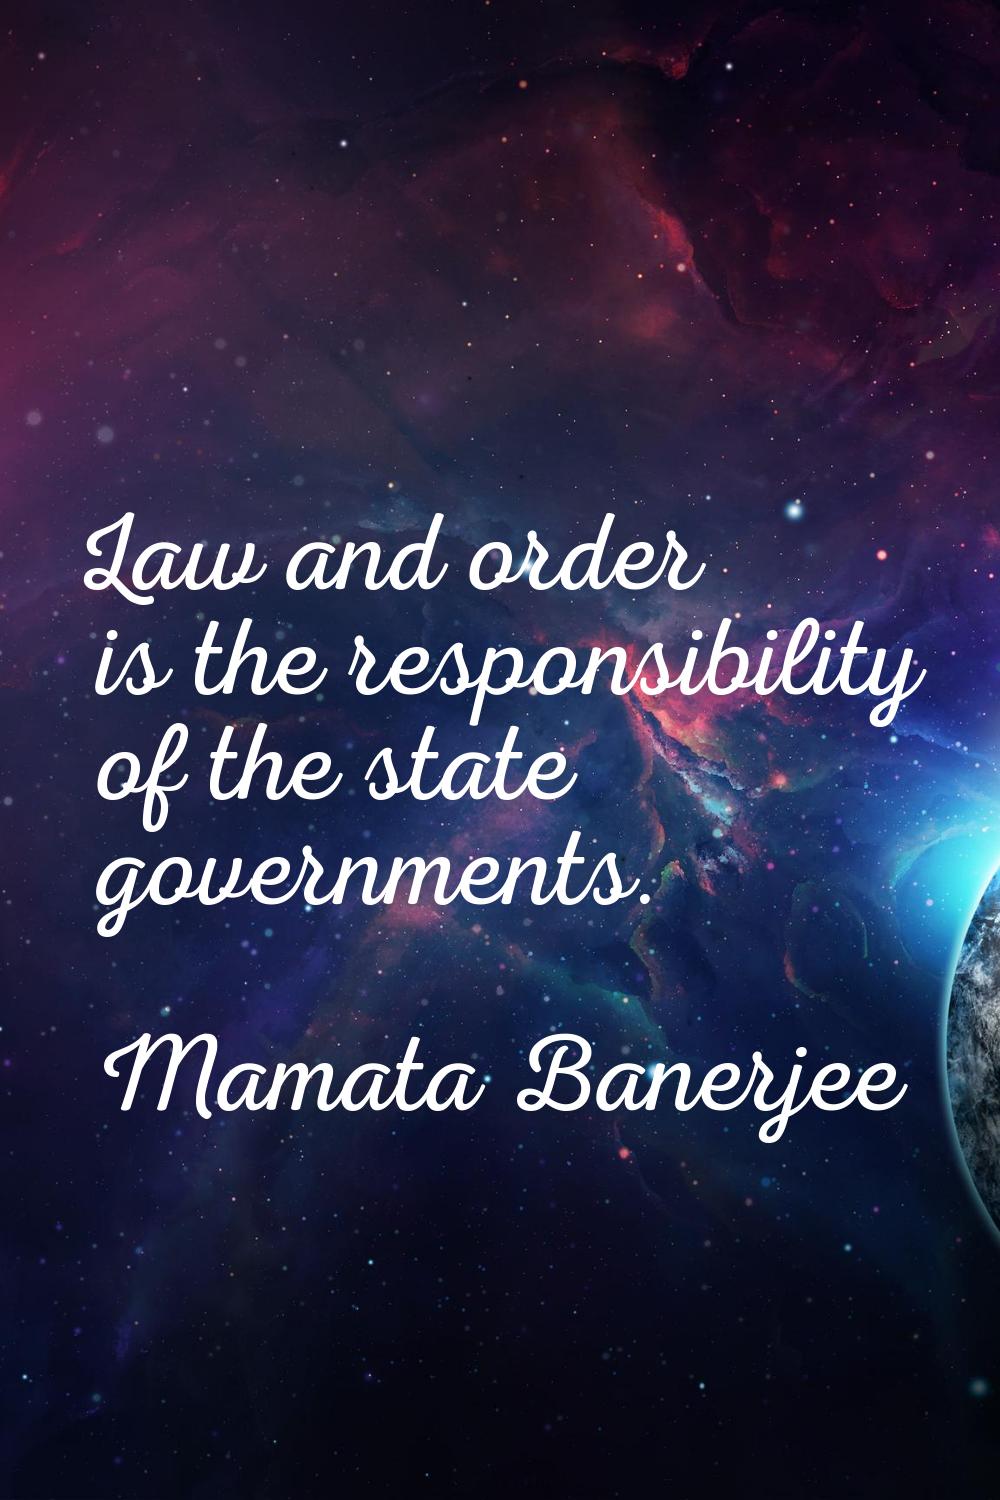 Law and order is the responsibility of the state governments.